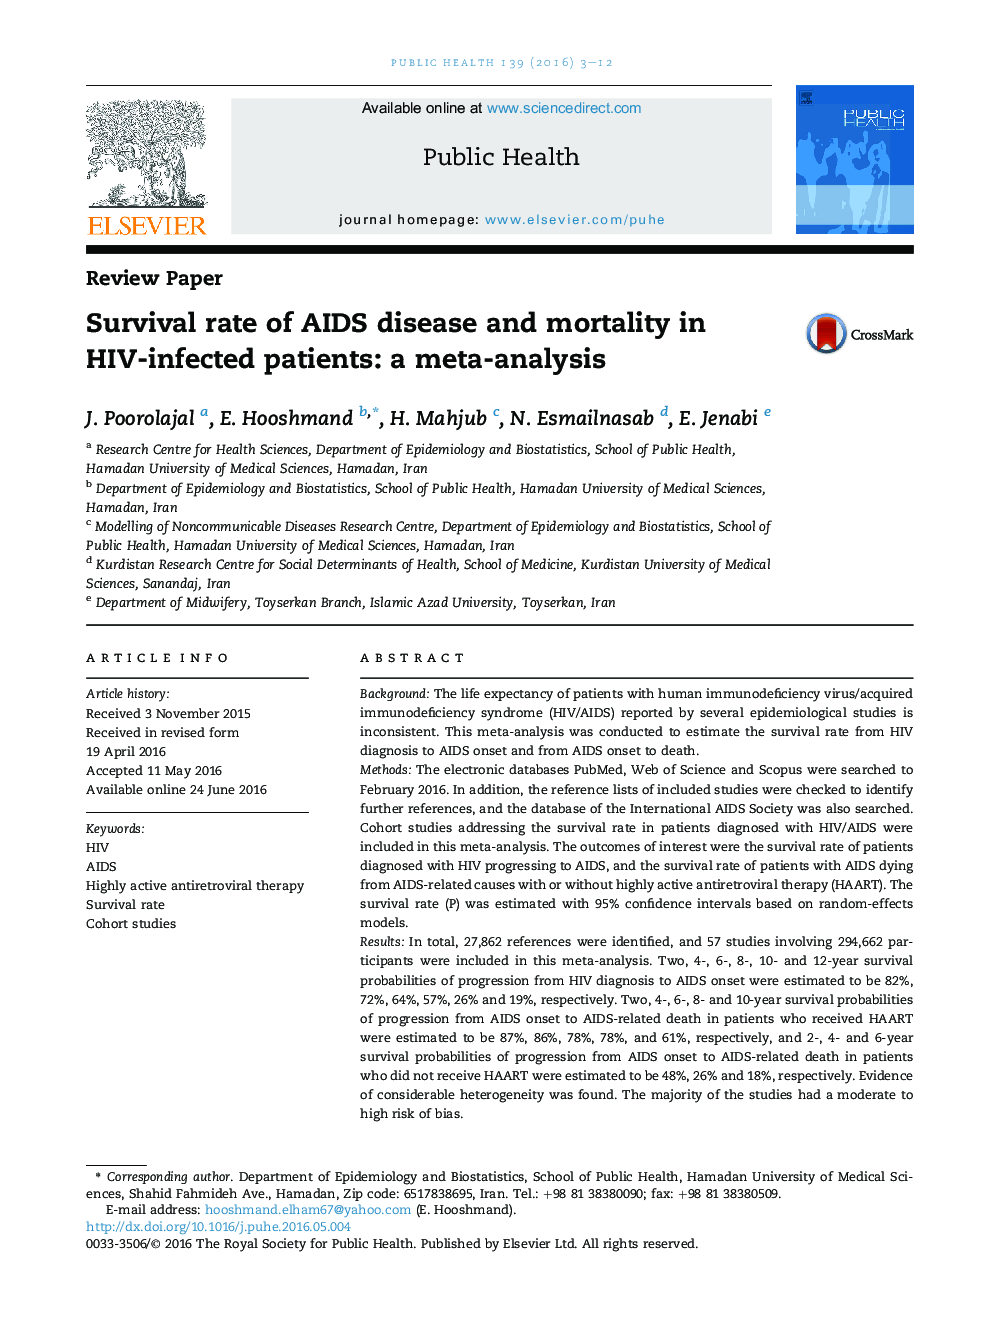 Survival rate of AIDS disease and mortality in HIV-infected patients: a meta-analysis